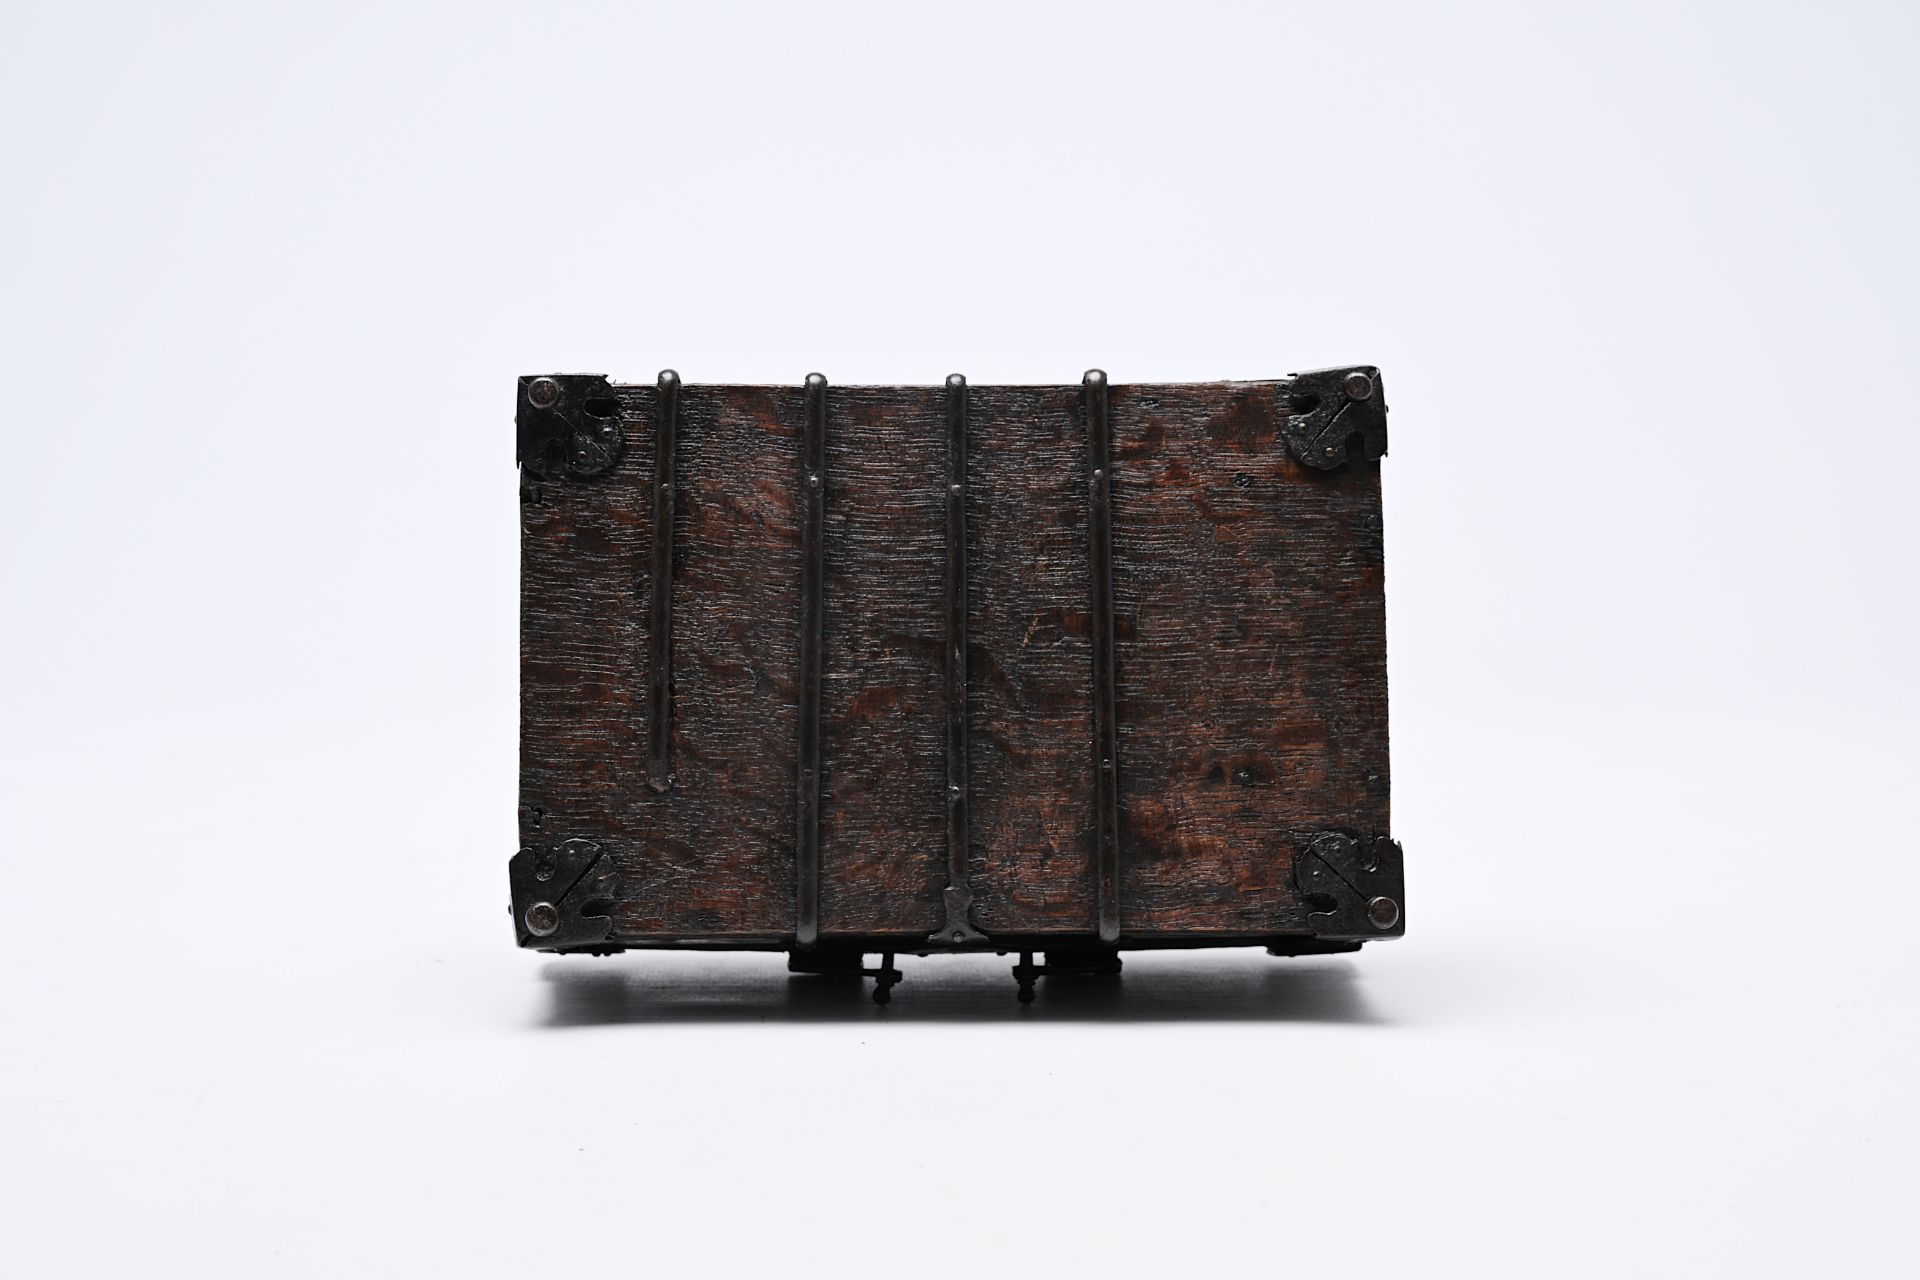 A wooden chest with iron mounts, Western Europe, 16th C. - Image 10 of 11